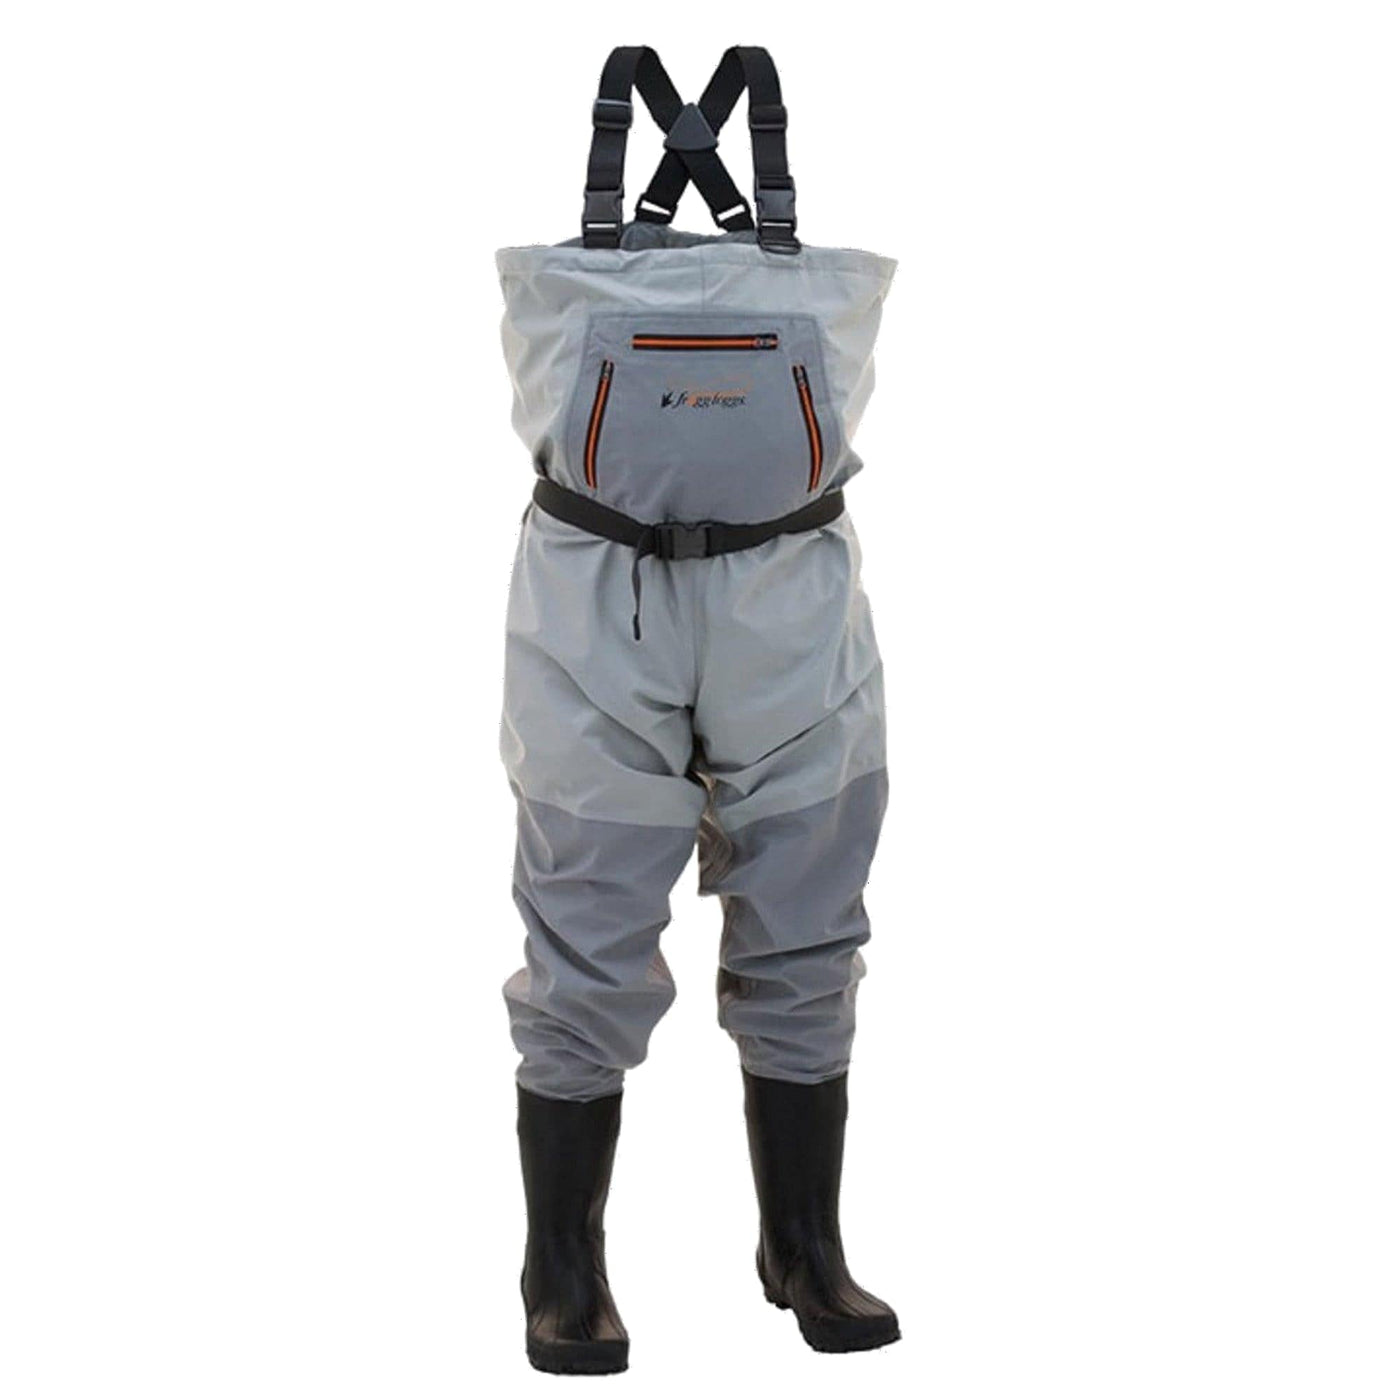 Frogg Toggs Frogg Toggs Men's Hellbender Cleated Chest Wader 10 Waders